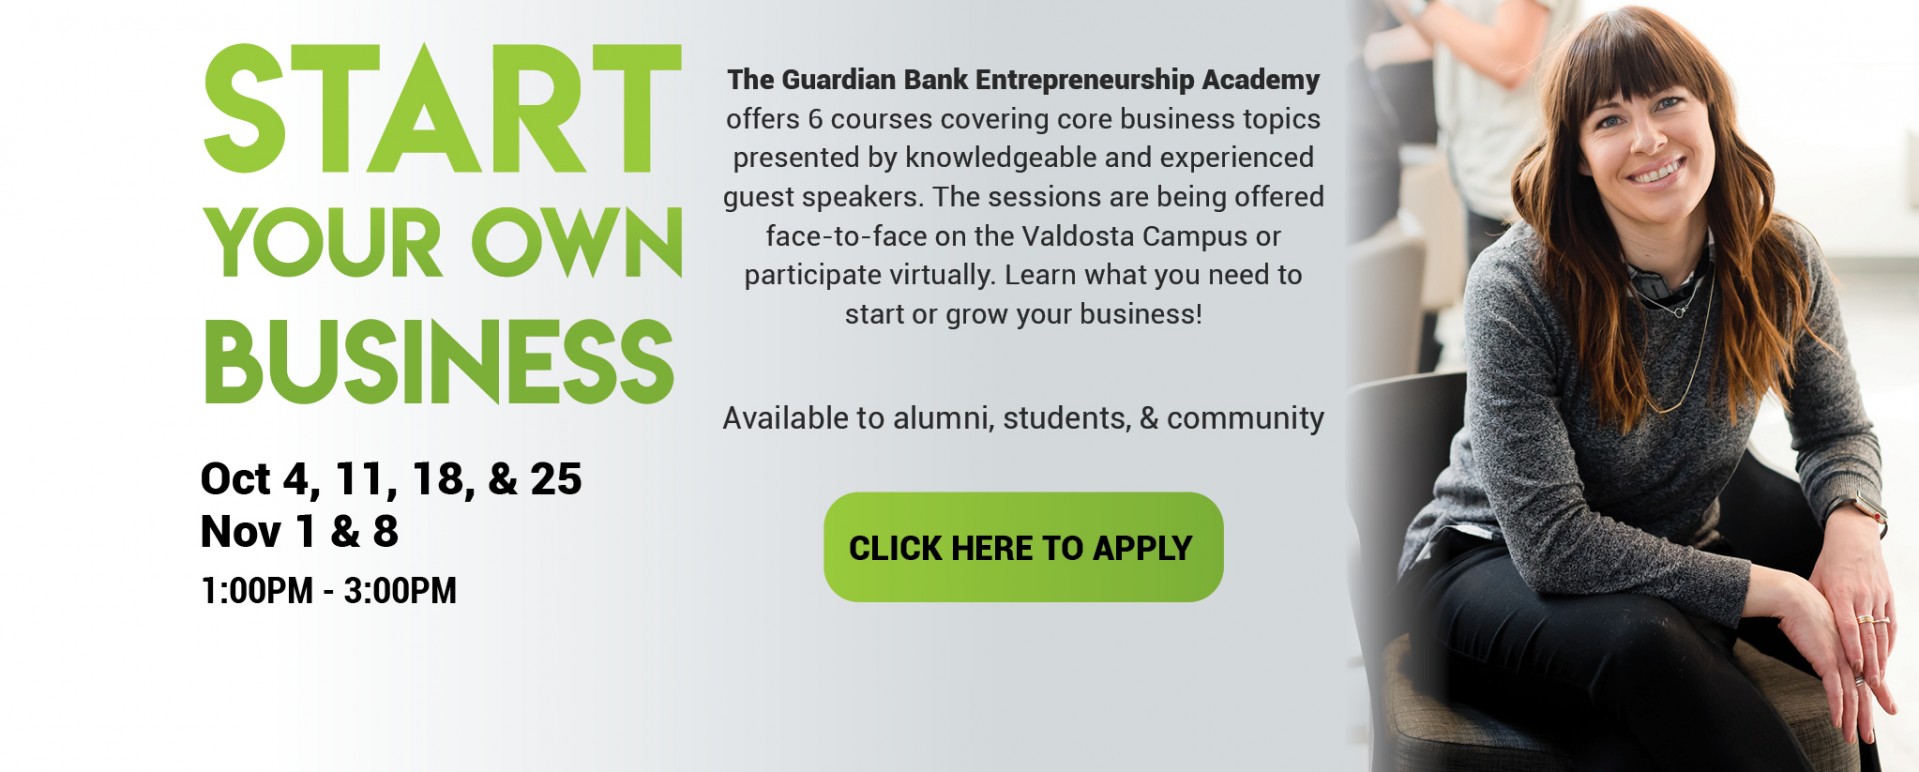 Sign up for the  Guardian Bank Entrepreneurship Academy today!